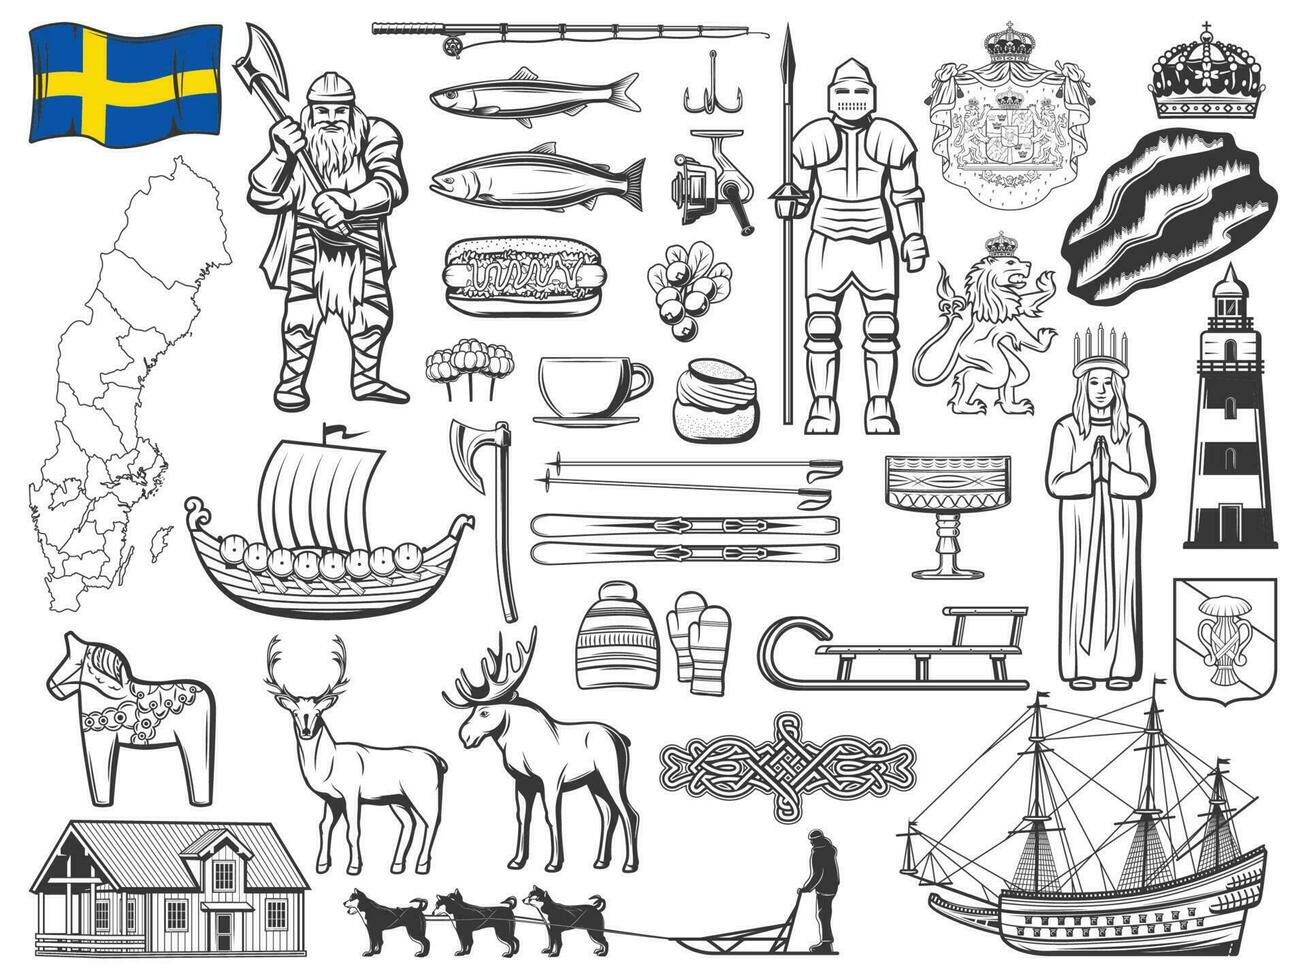 Sweden history, cuisine and culture icons vector